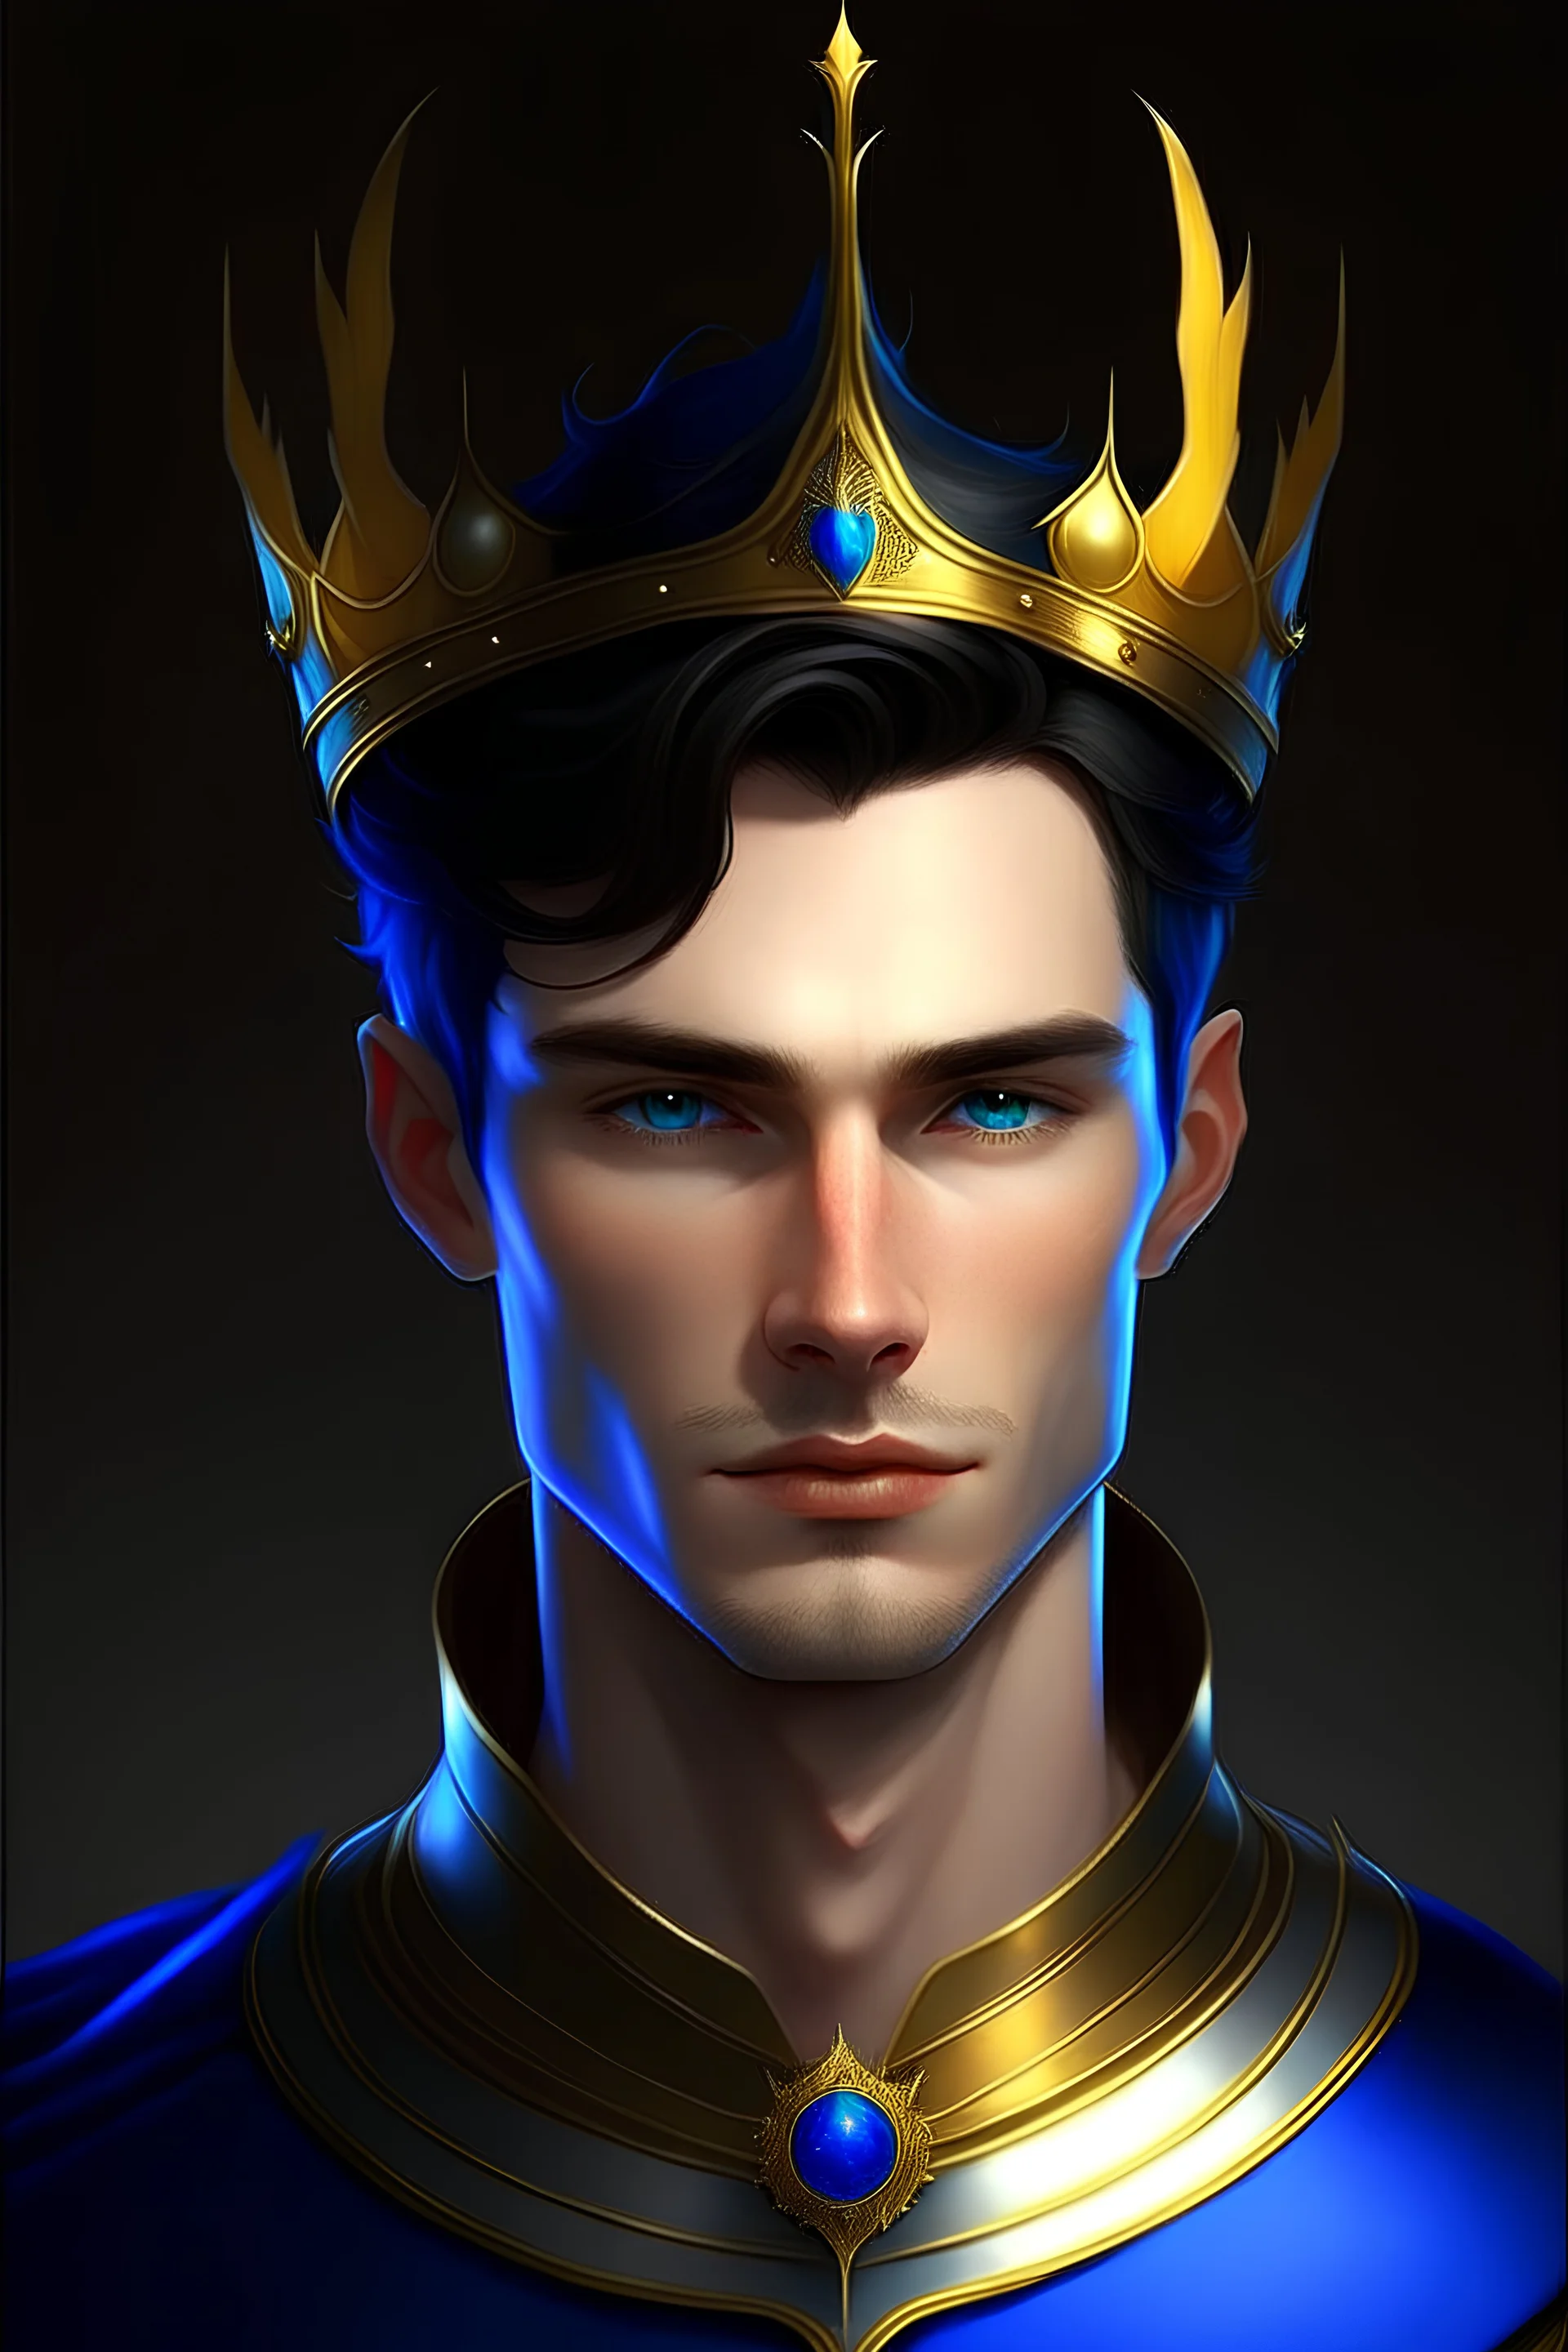 Handsome man with black hair and blue eyes, wearing a golden crown, pointed ears